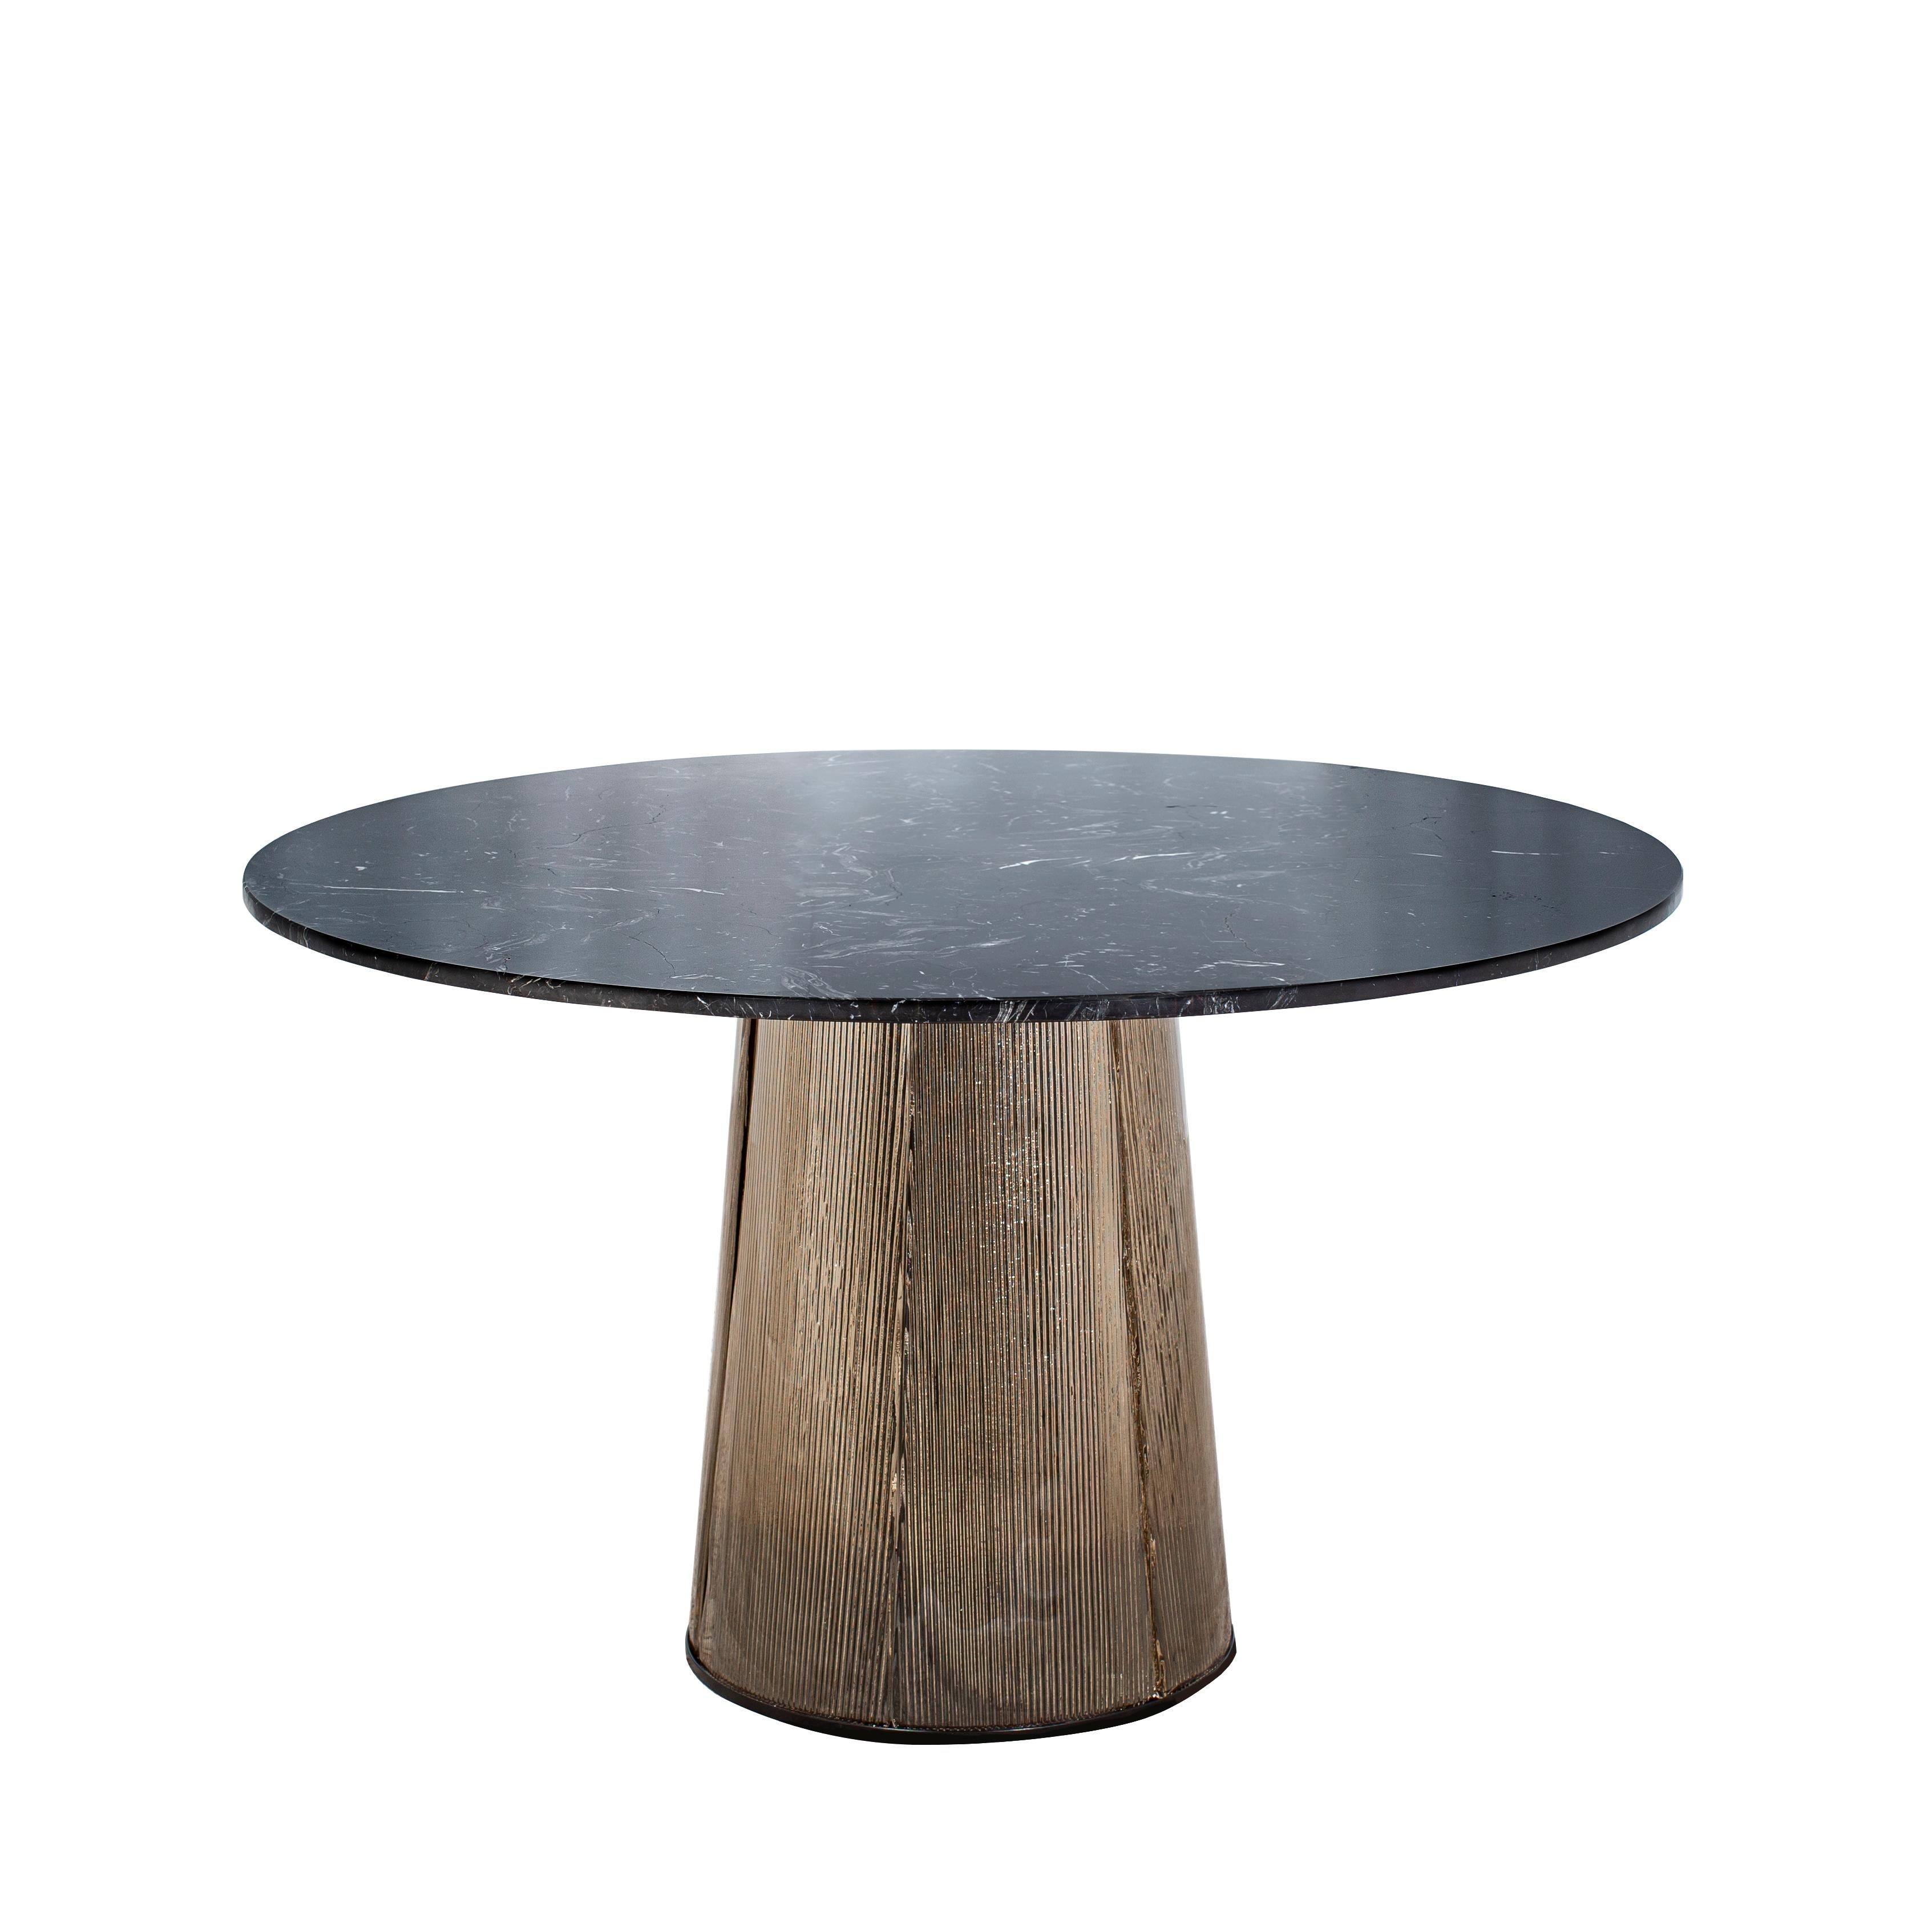 Bent dining table medium black smoky grey by Pulpo
Dimensions: D130 x H74 cm.
Materials: casted glass, carrara, black nero or light green marble table top.

Also available in different finishes and dimensions. 

Two kinds of material united in